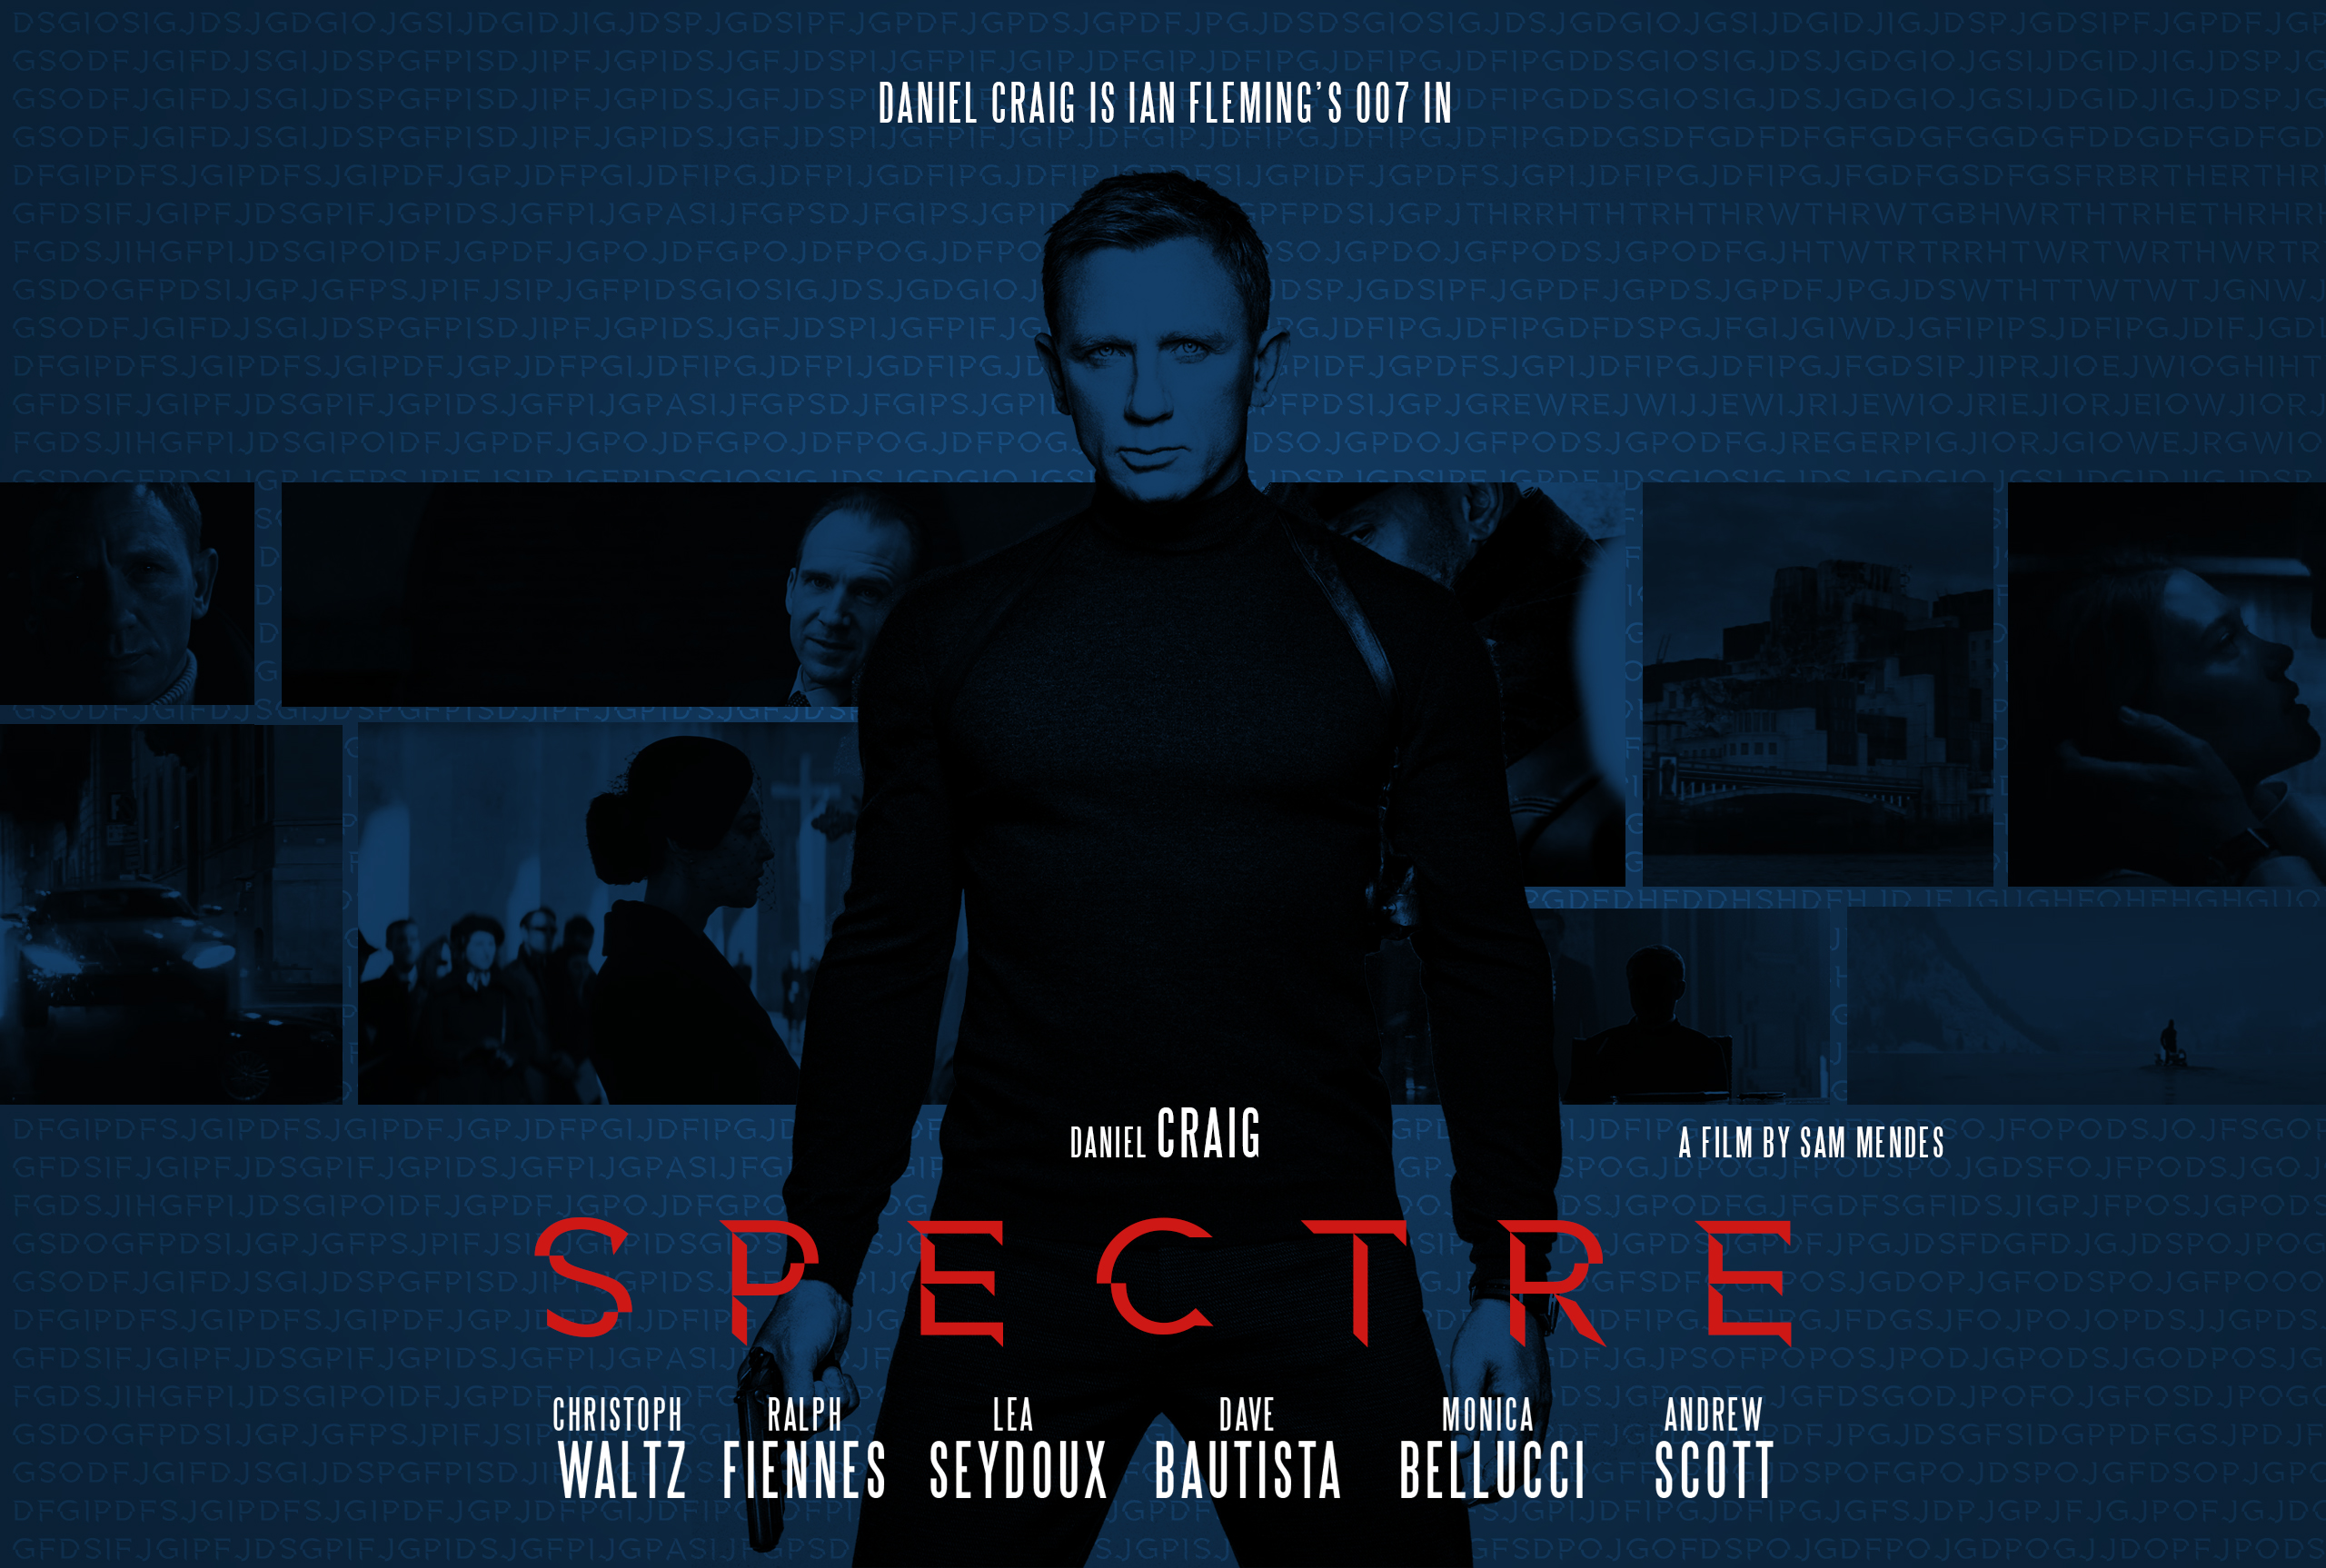 spectre___tinker_tailor_solider_spy_style_by_swannmadeleine-d915uuy.jpg